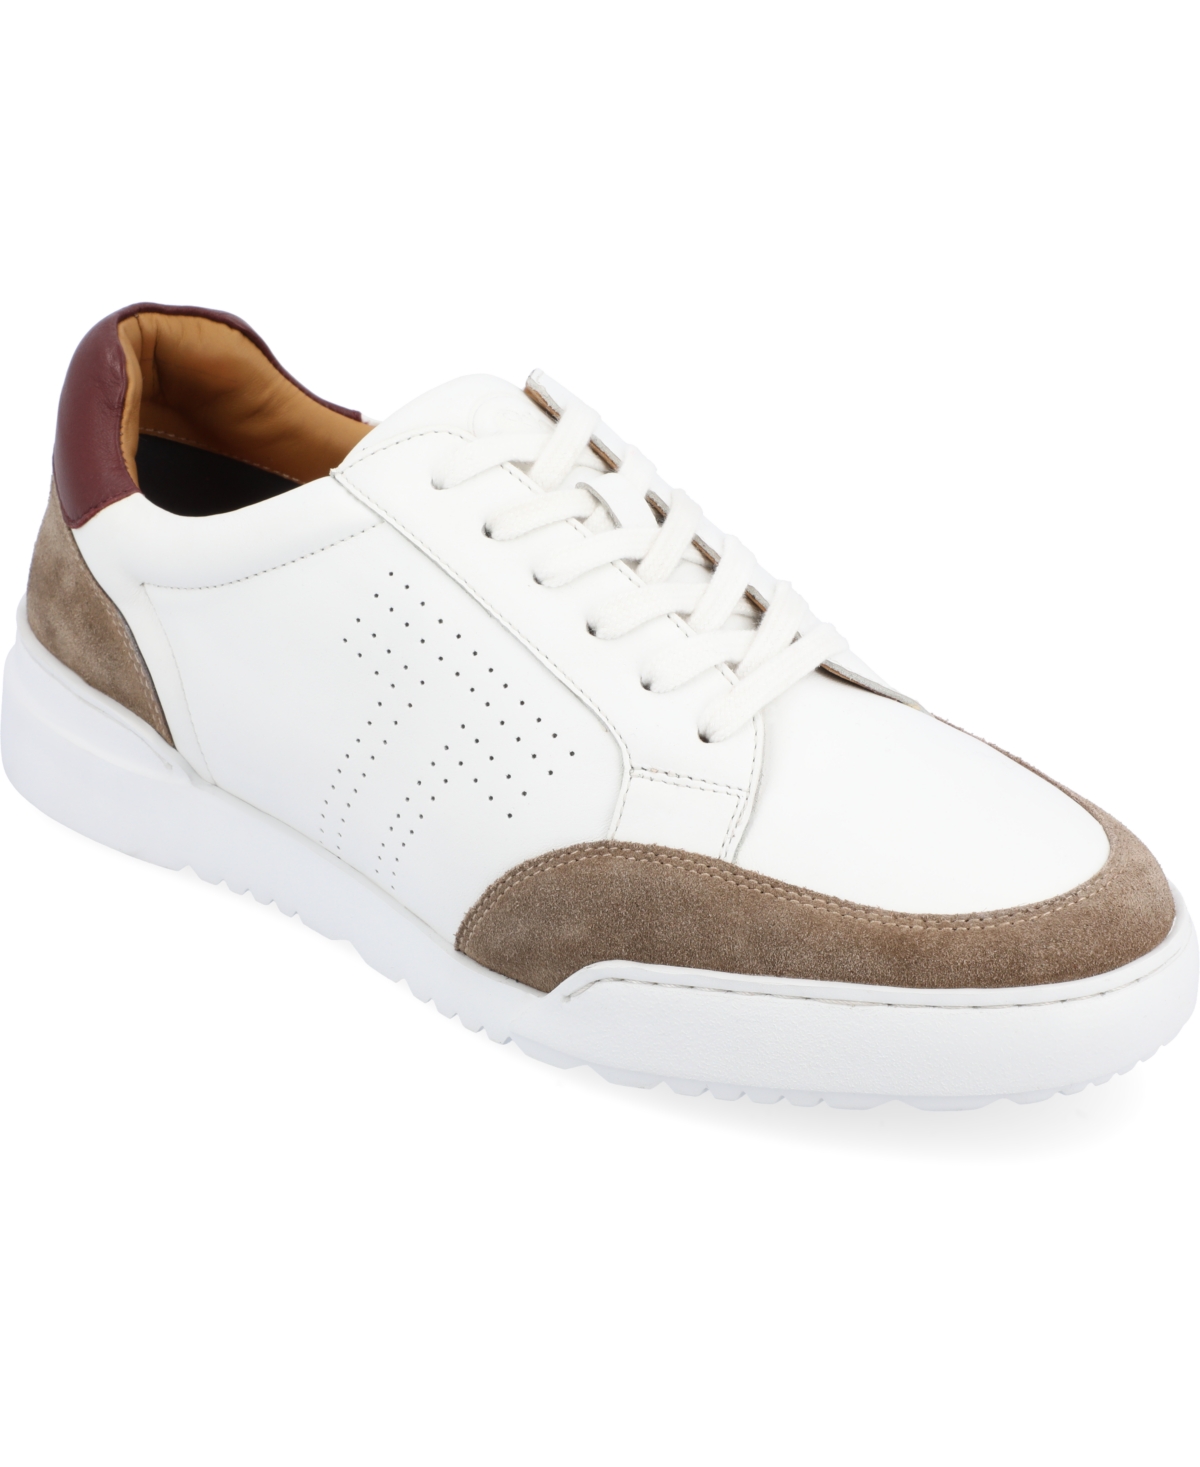 Men's Roderick Casual Leather Sneakers - Taupe